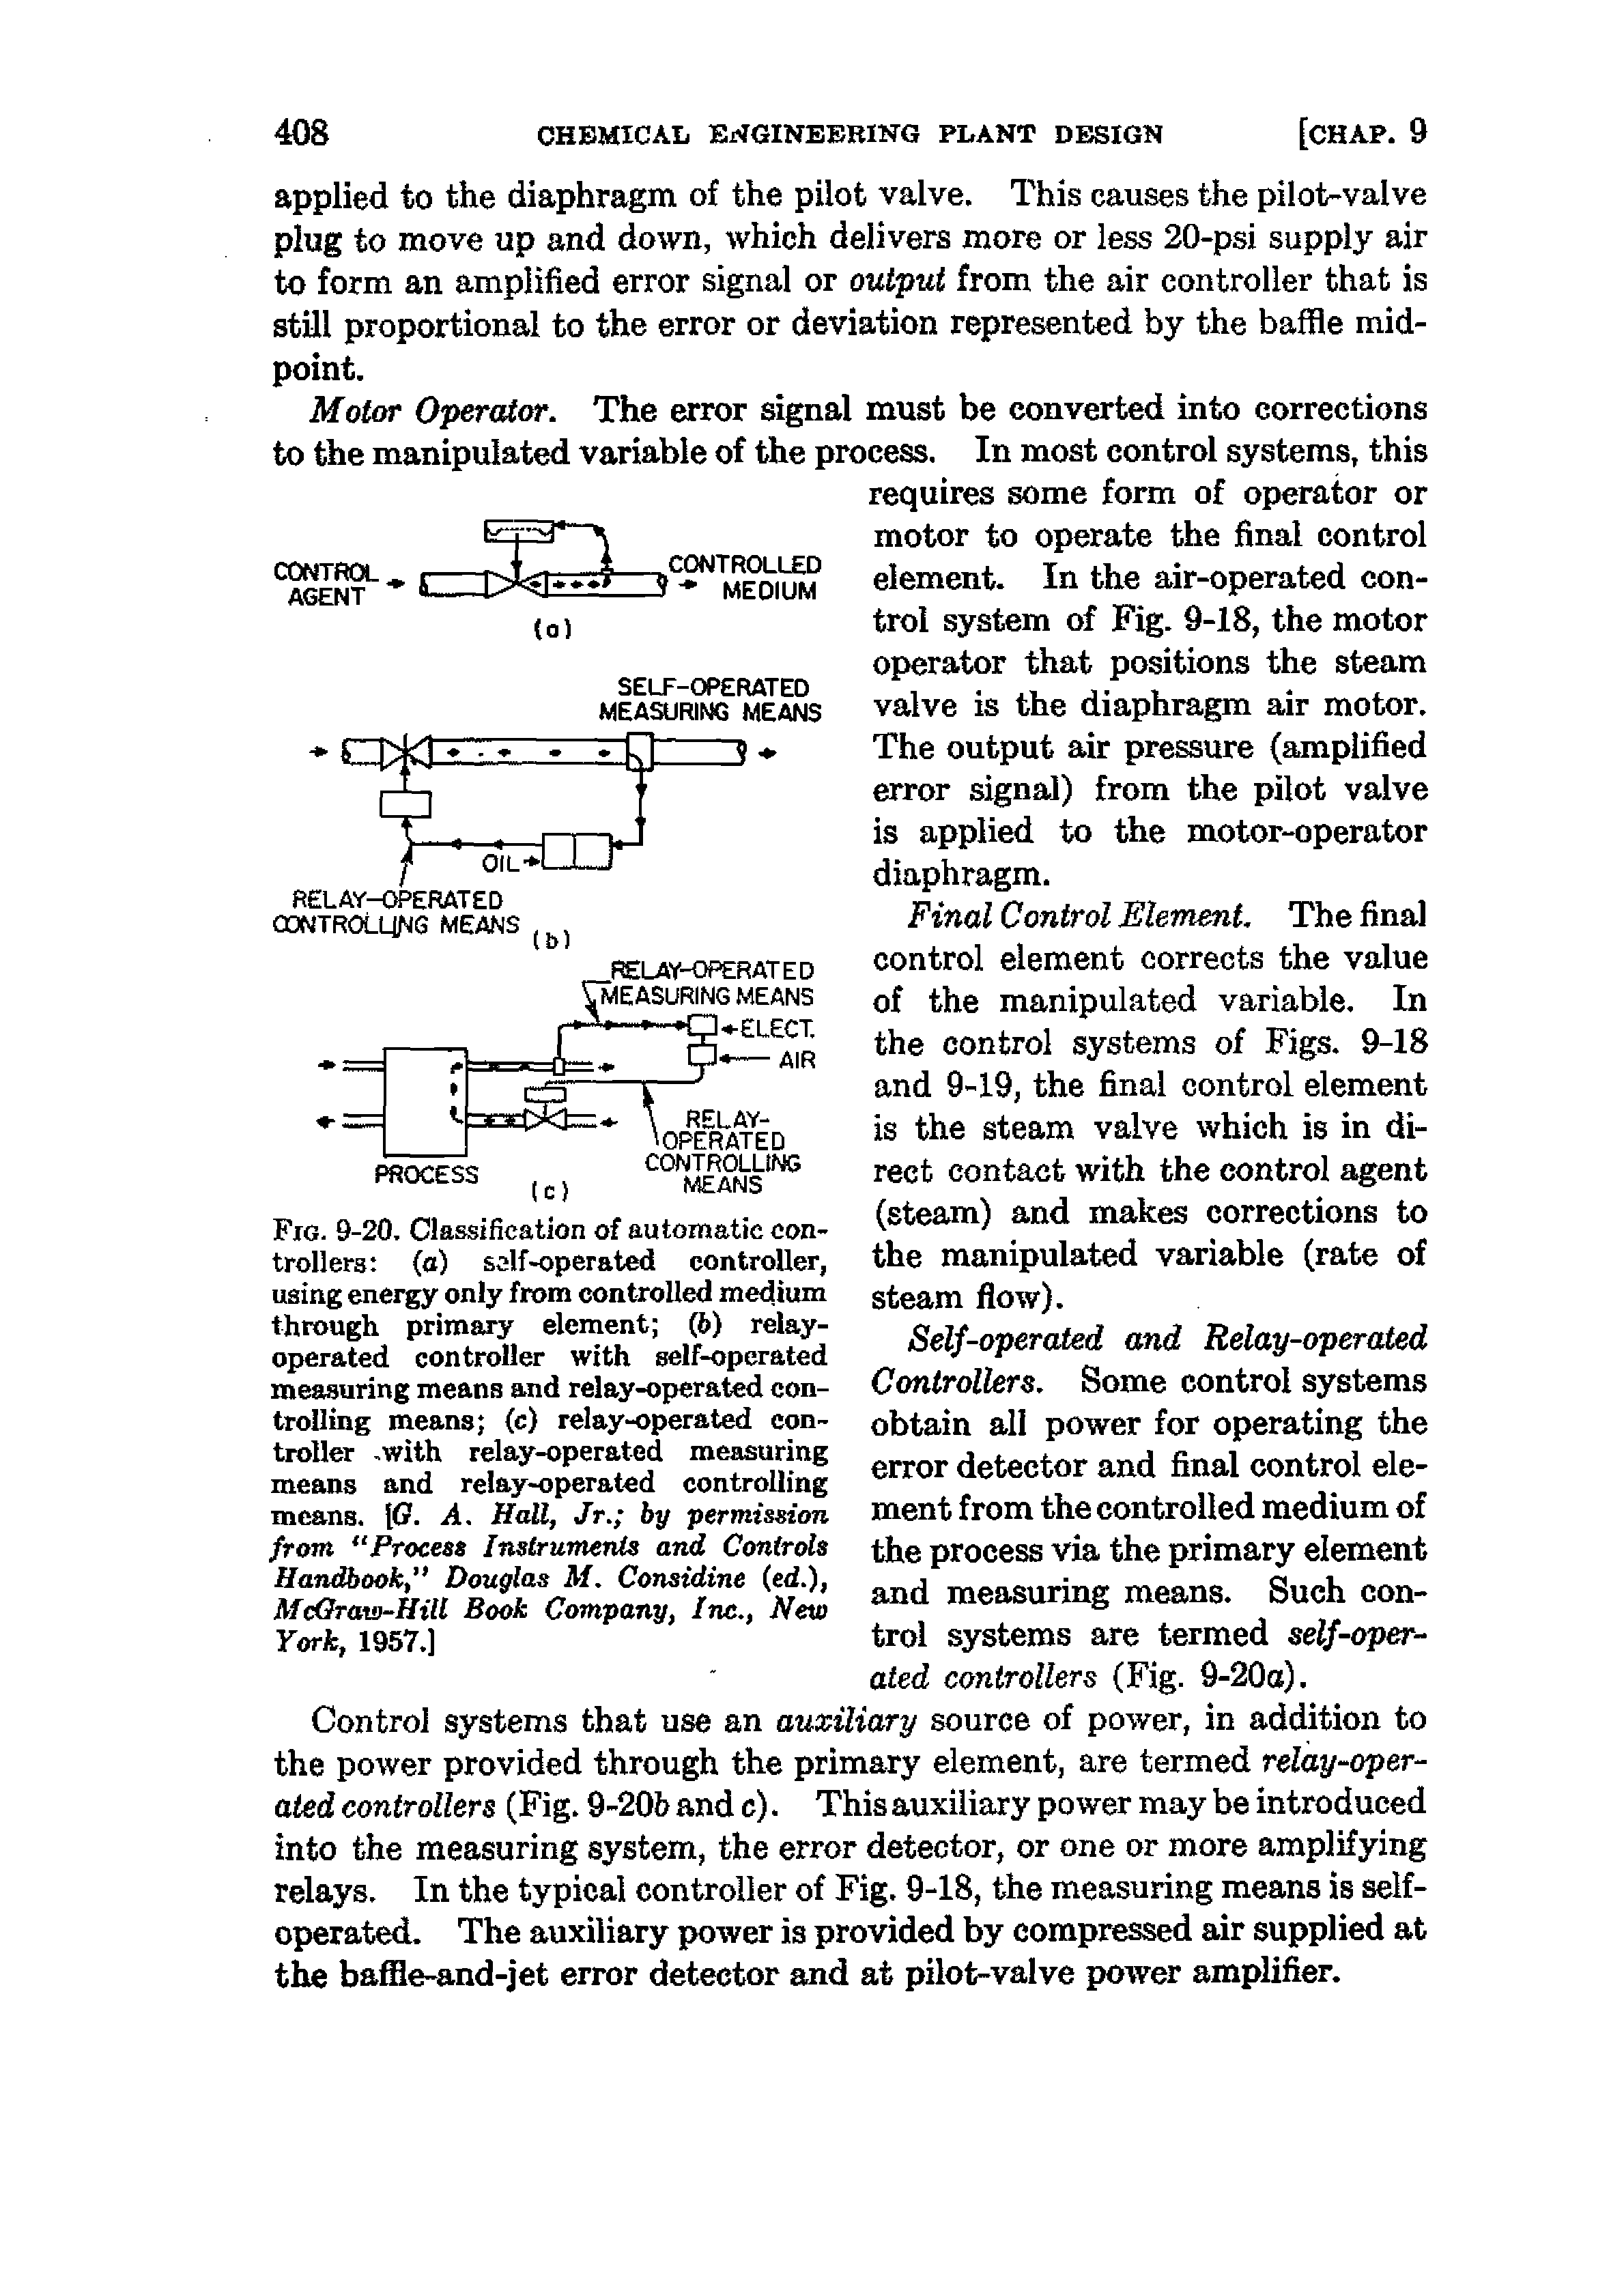 Fig. 9-20, Classification of automatic controllers (a) self-operated controller, using energy only from controlled medium through primary element (6) relay-operated controller with self-operated measuring means and relay-operated controlling means (c) relay-operated controller. with relay-operated measuring means and relay-operated controlling means. [G. A. Hall, Jr. by permission from Process Instruments and Controls Handbook, Douglas M. Considine (ed.), McQraw-Hill Book Company, Inc., New York, 1957.]...